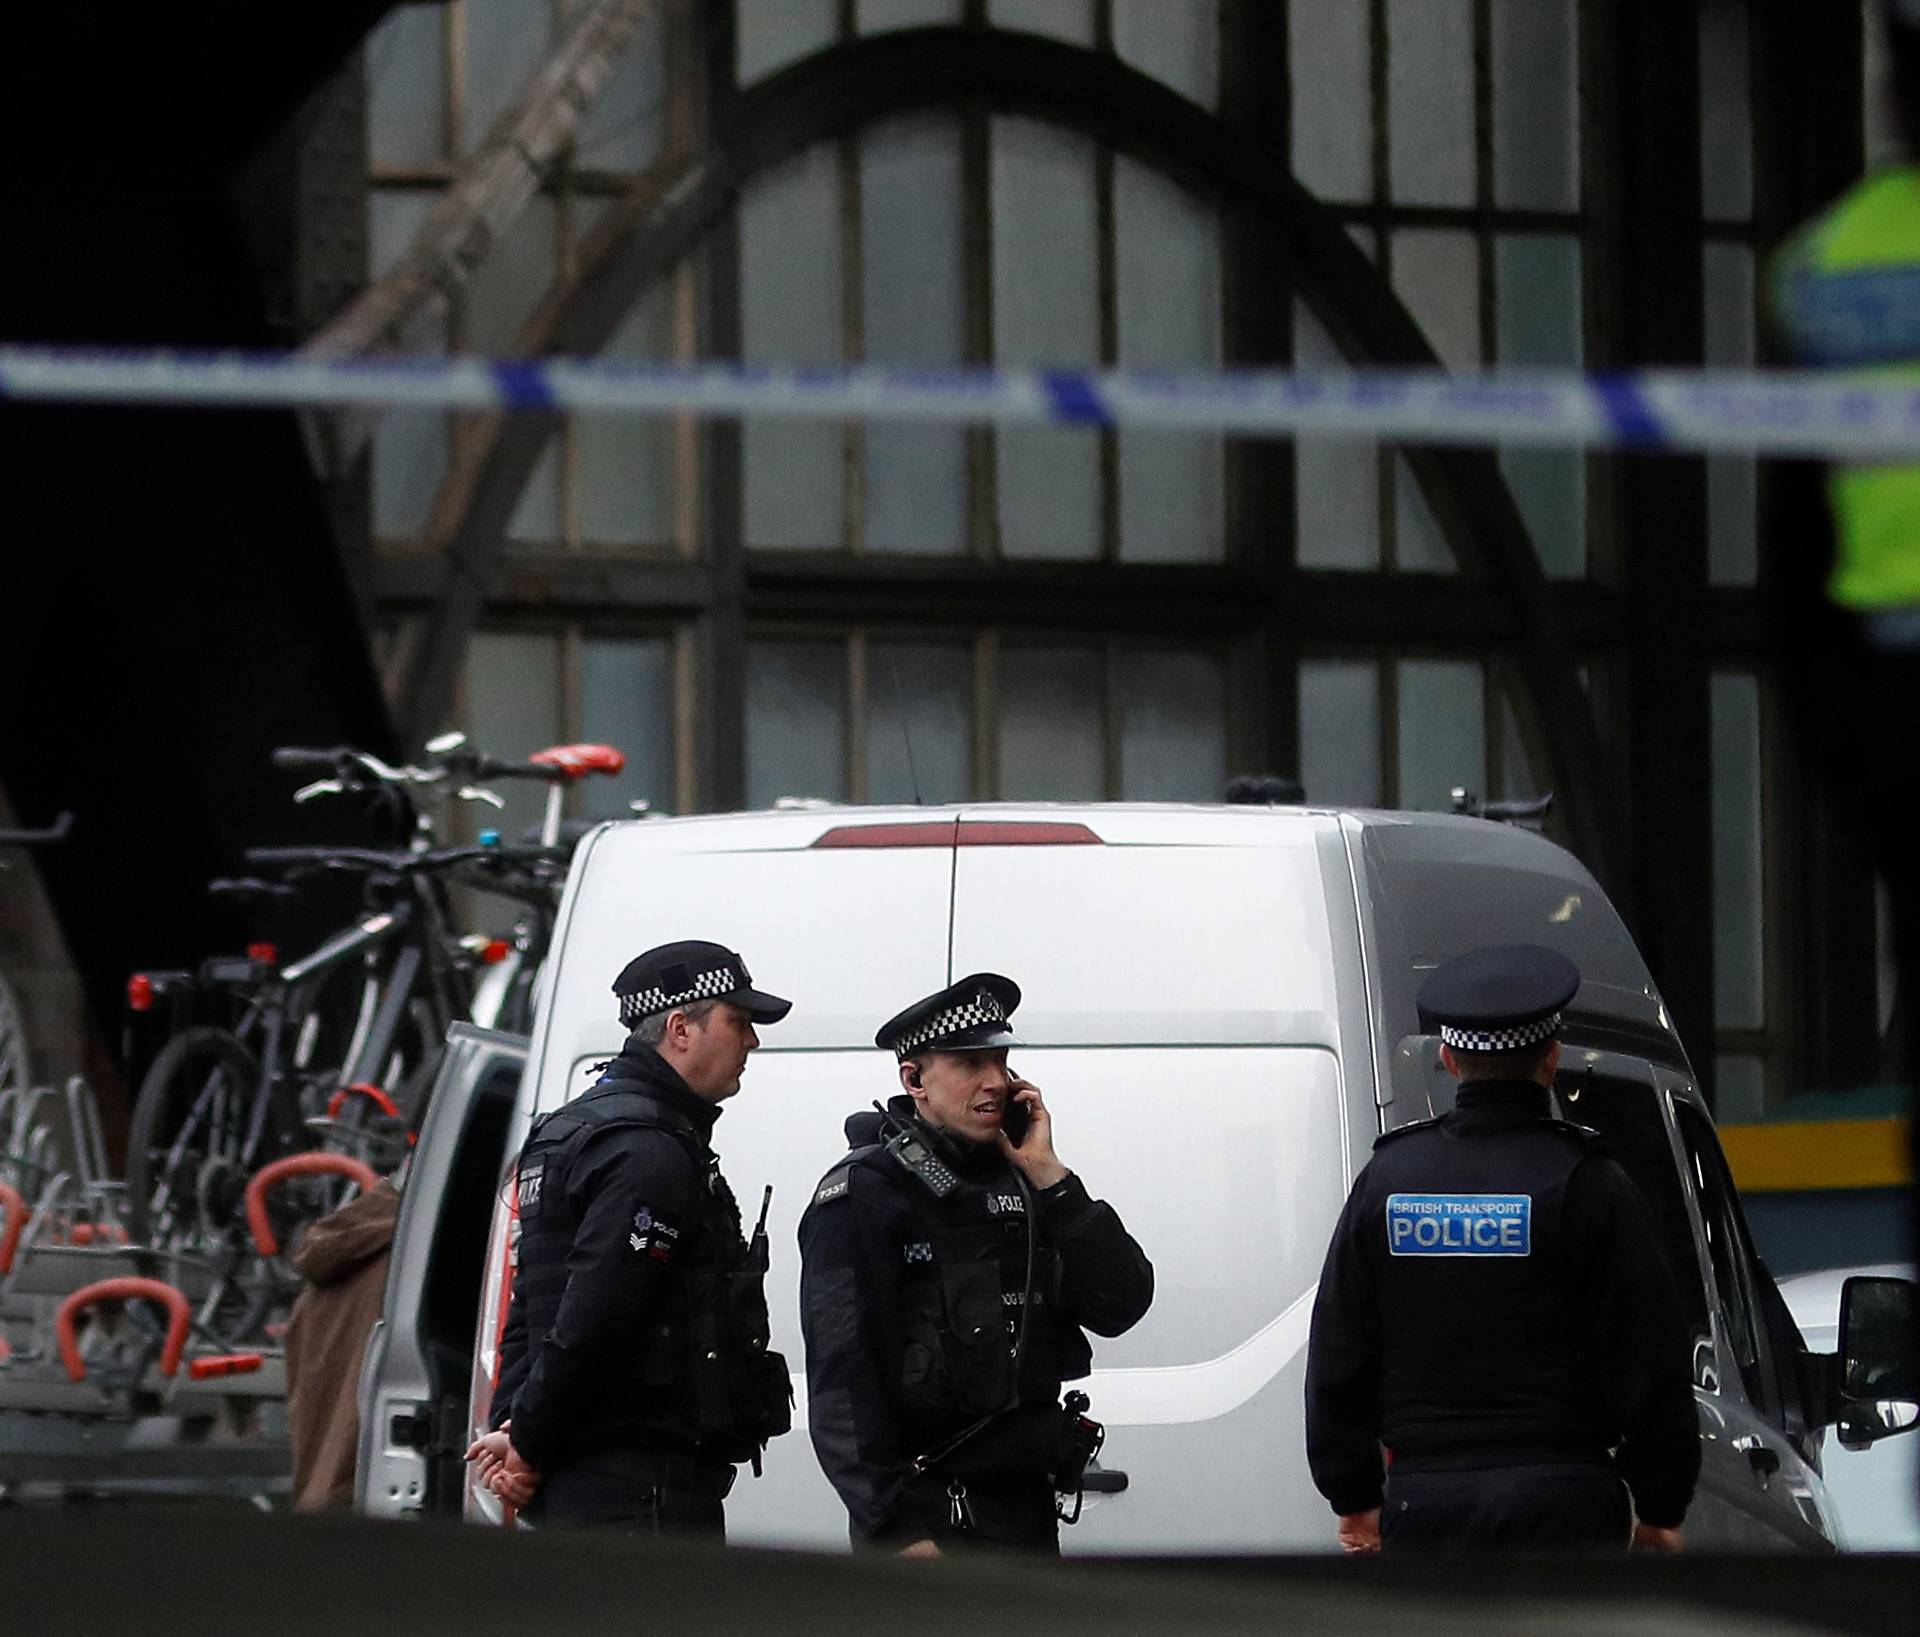 Police officers secure a cordoned off area at Waterloo station near to where a suspicious package was found, in London